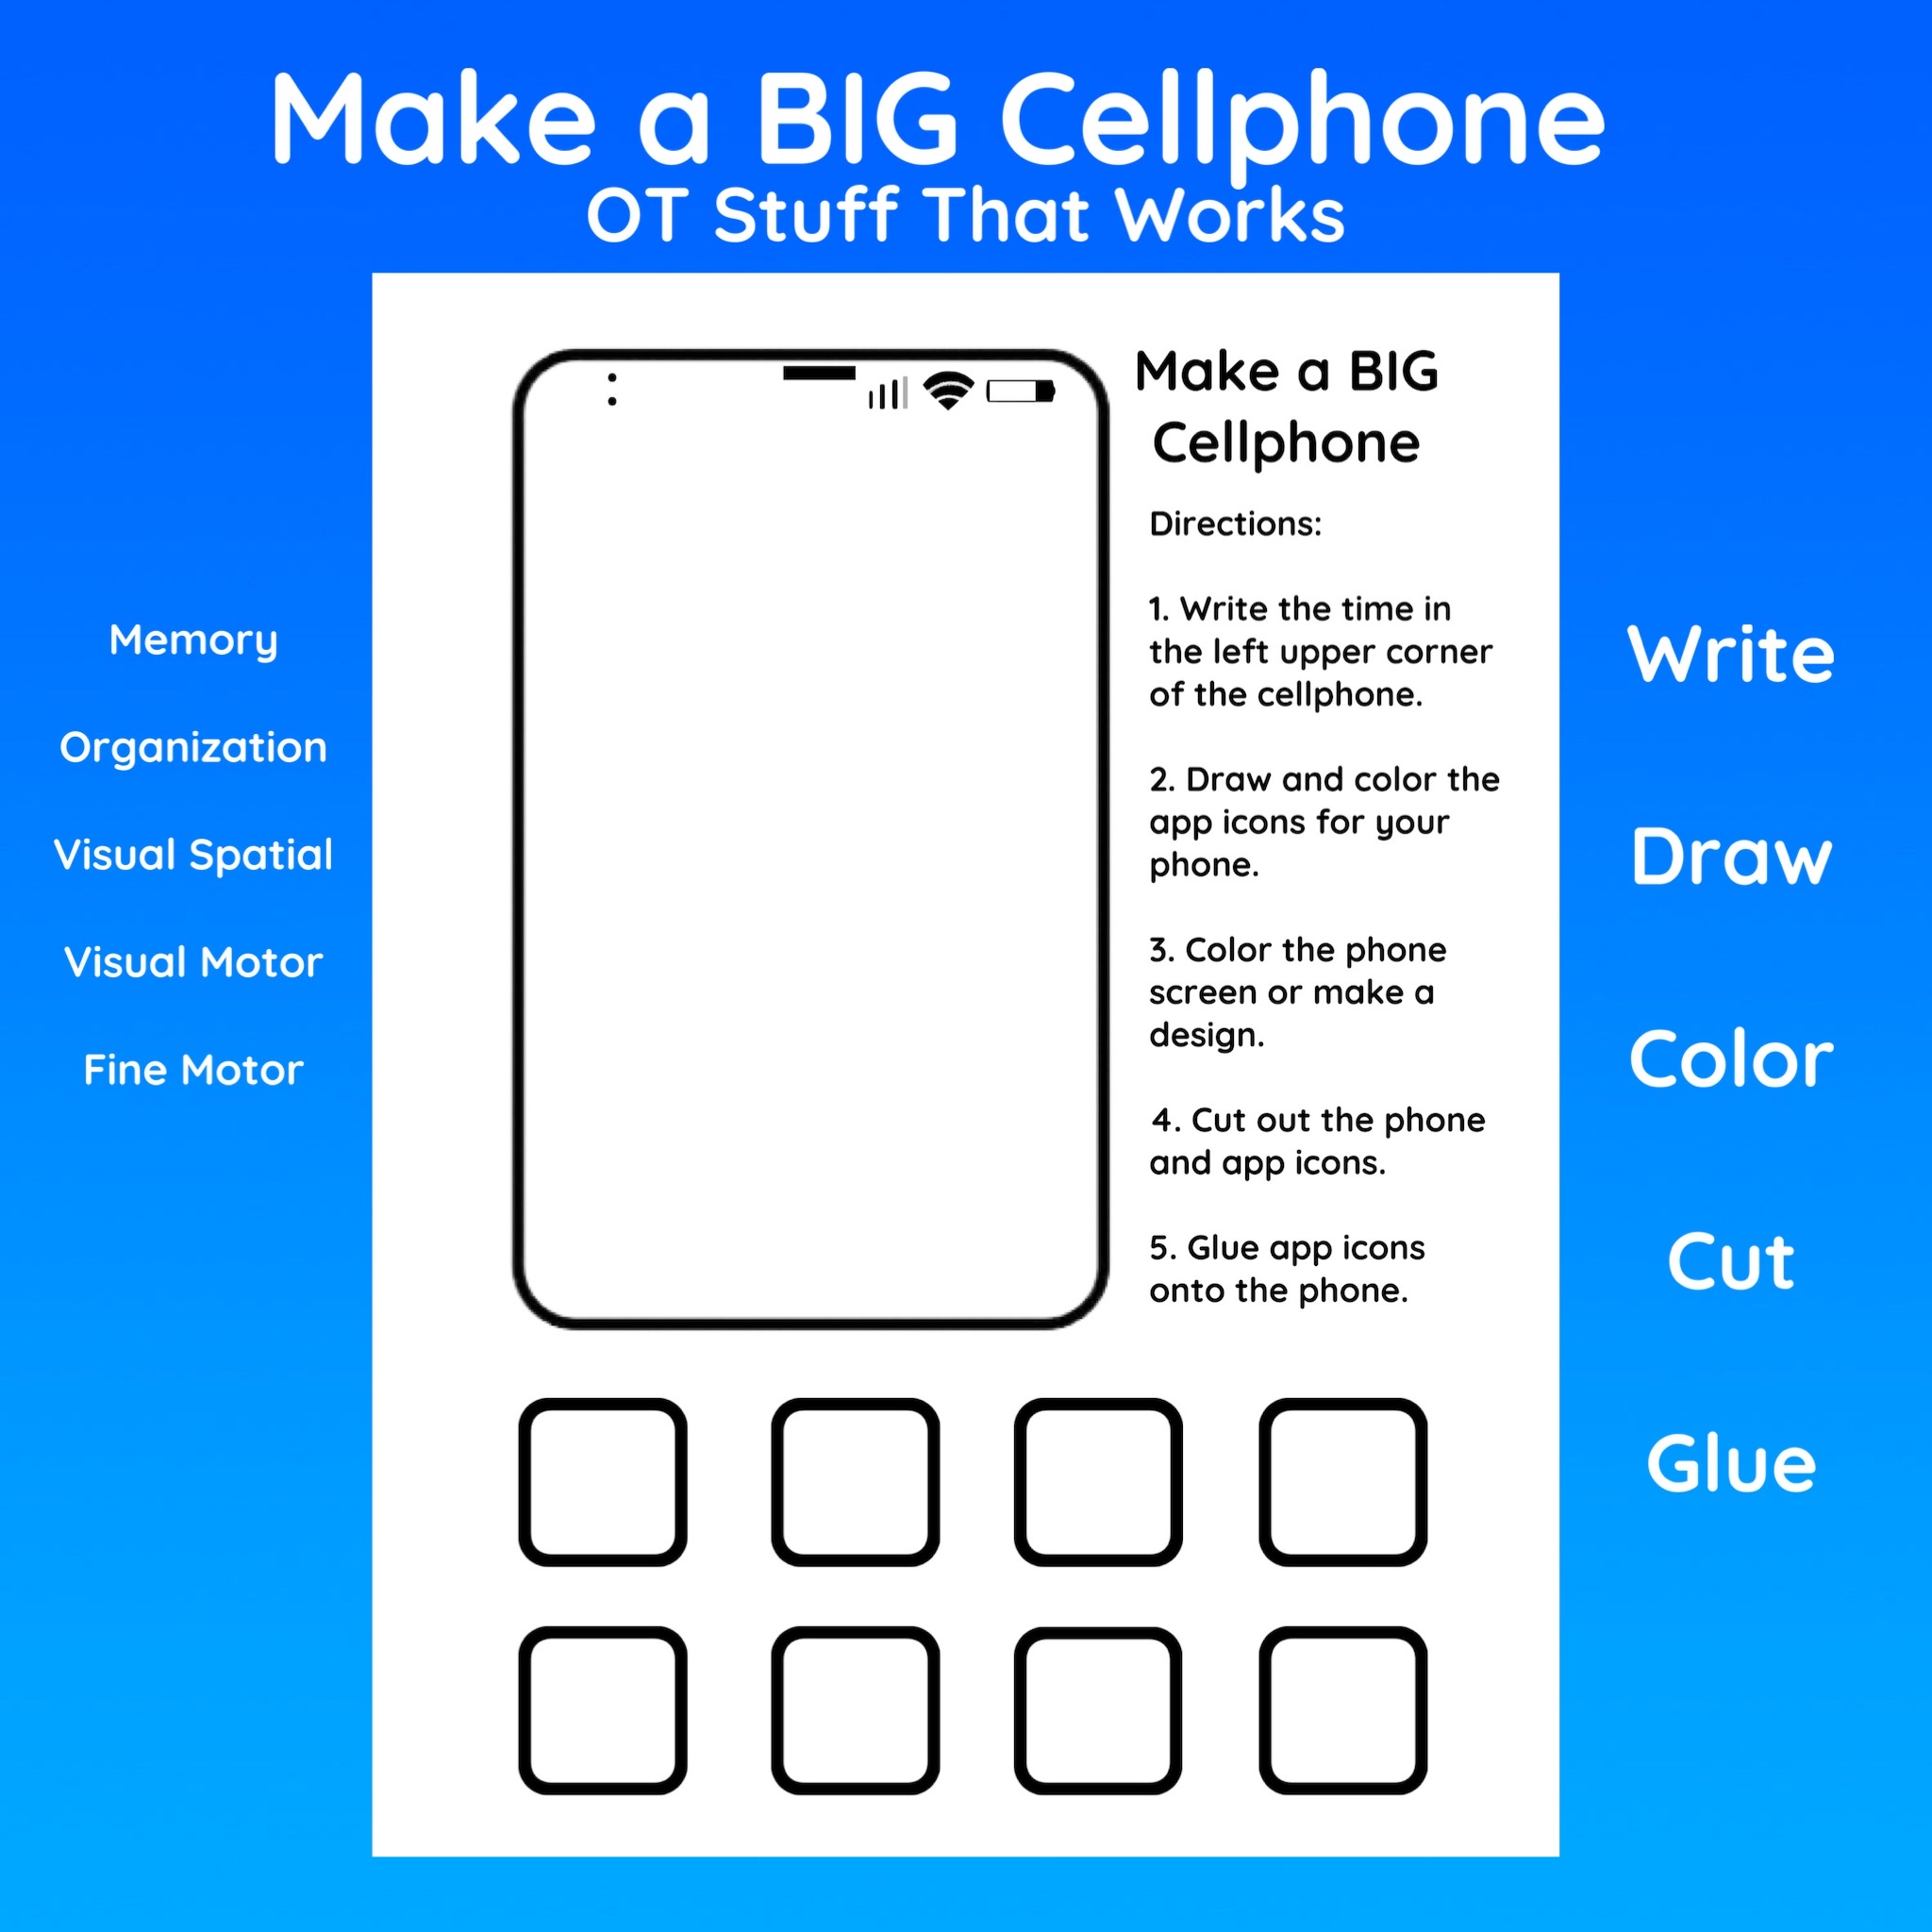 Make a BIG Cellphone (Draw, Color, Cut, and Glue Activity)